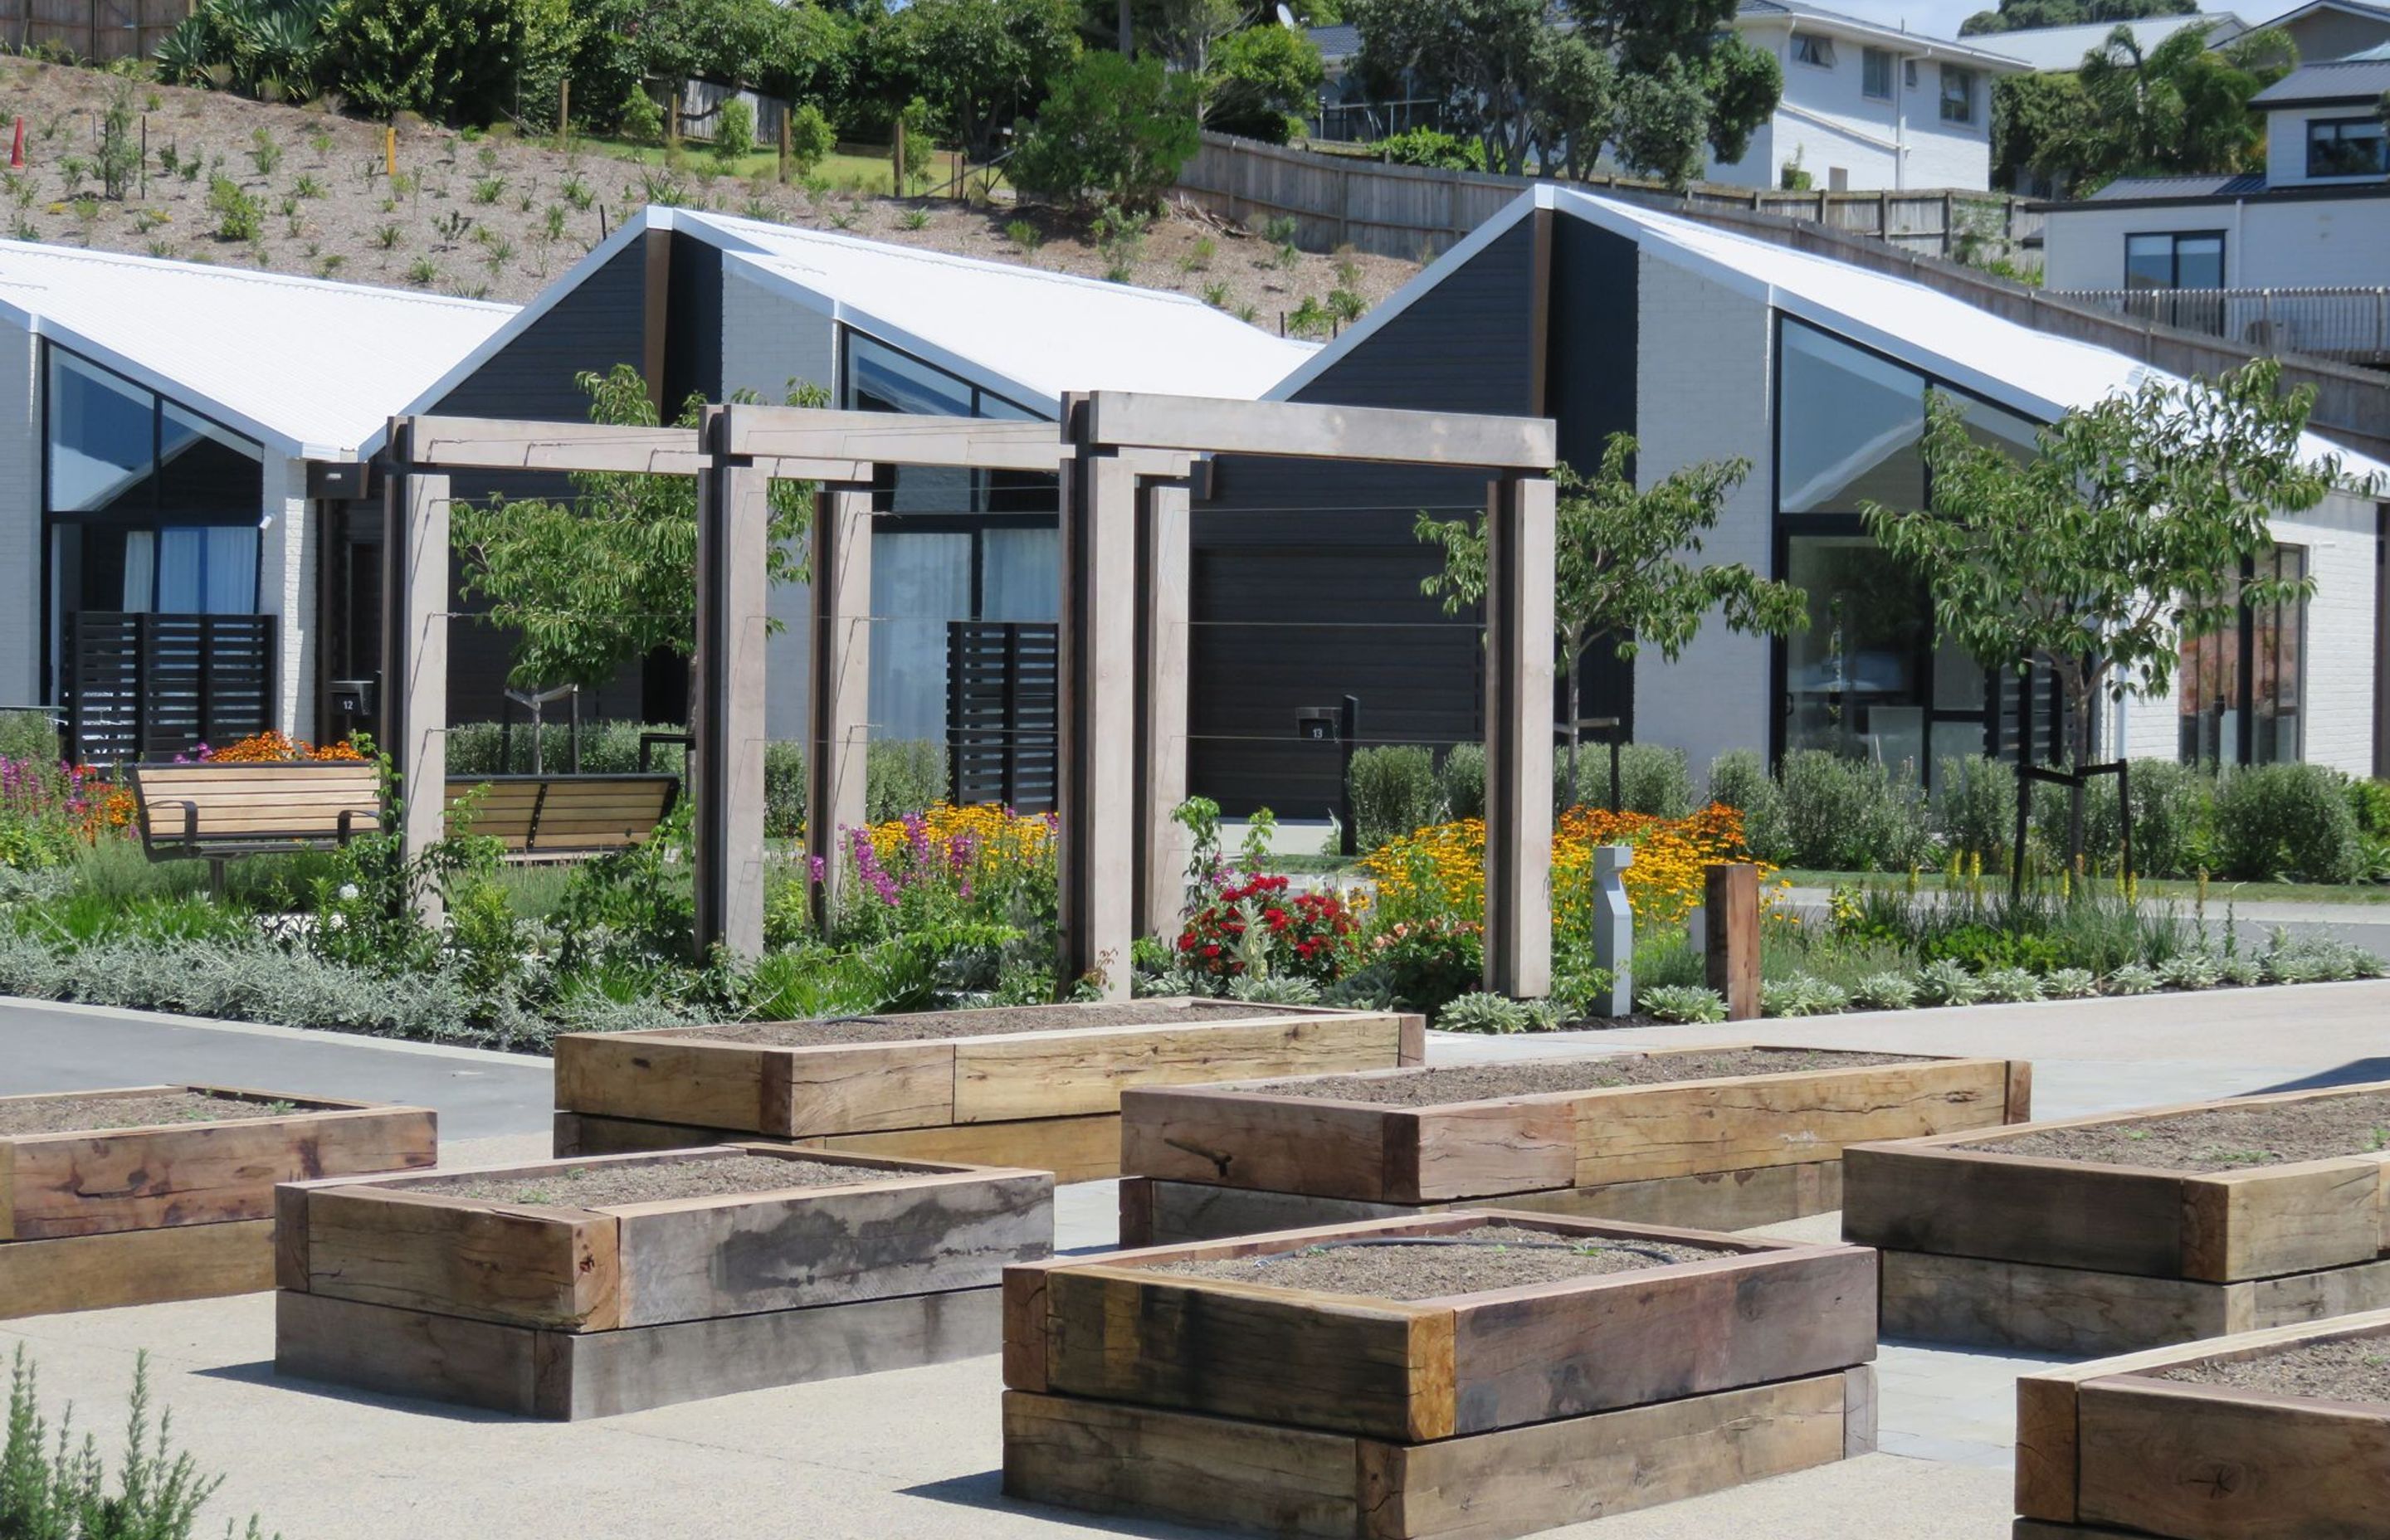 A mix of landscaping types, including raised vegetable beds, provide residents with points of interaction within the landscape.